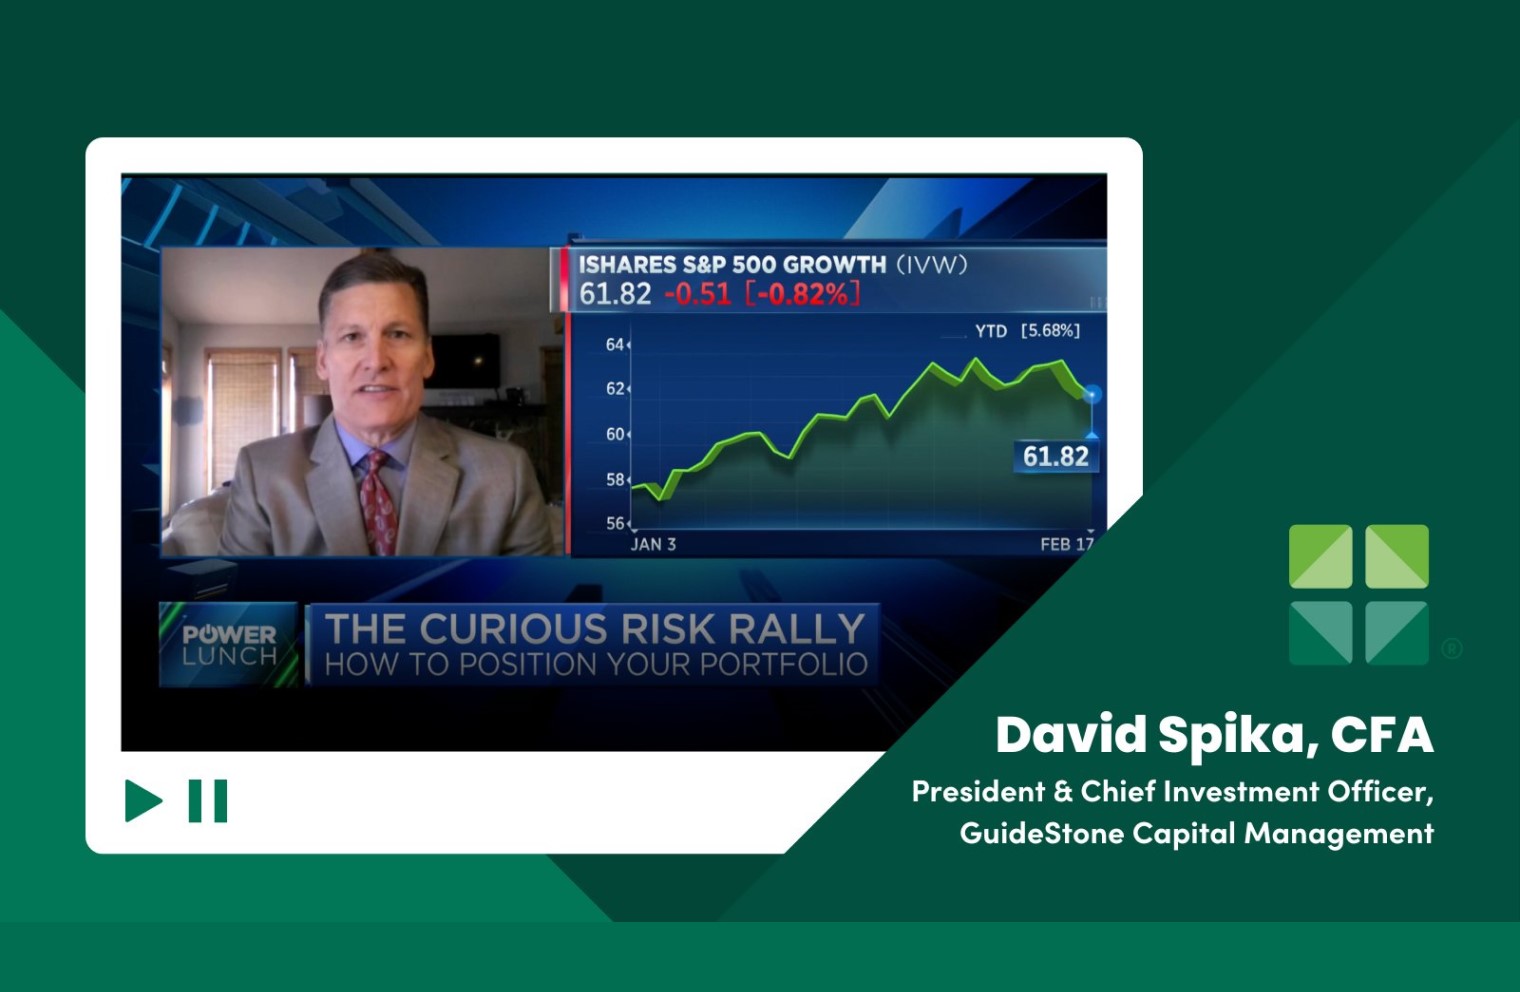 David Spika, CFA. President and Chief Investment Officer, GuideStone Capital Mangement